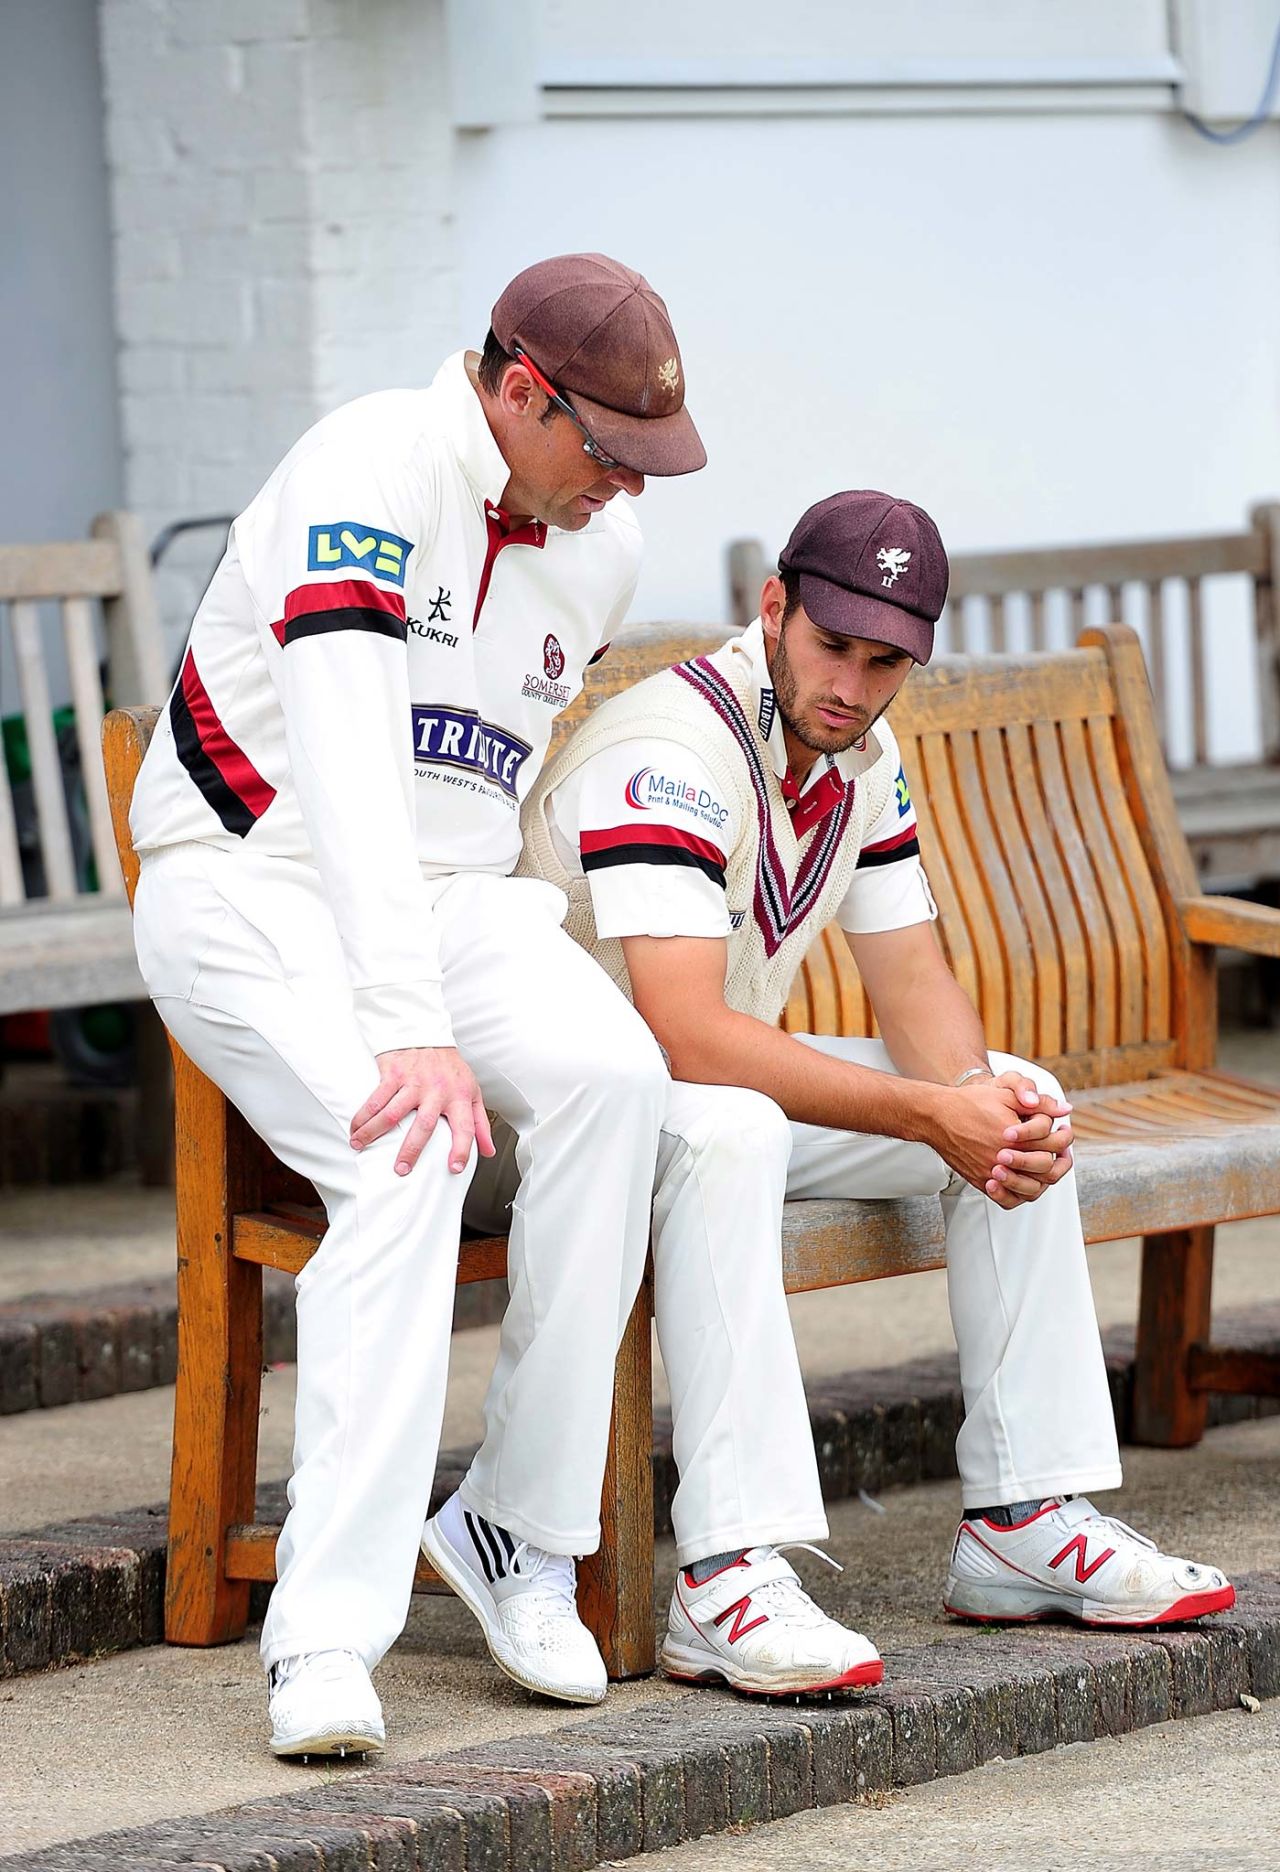 Marcus Trescothick talks to Lewis Gregory before the start of play, Middlesex v Somerset, day one, Watford, July 11, 2015 

